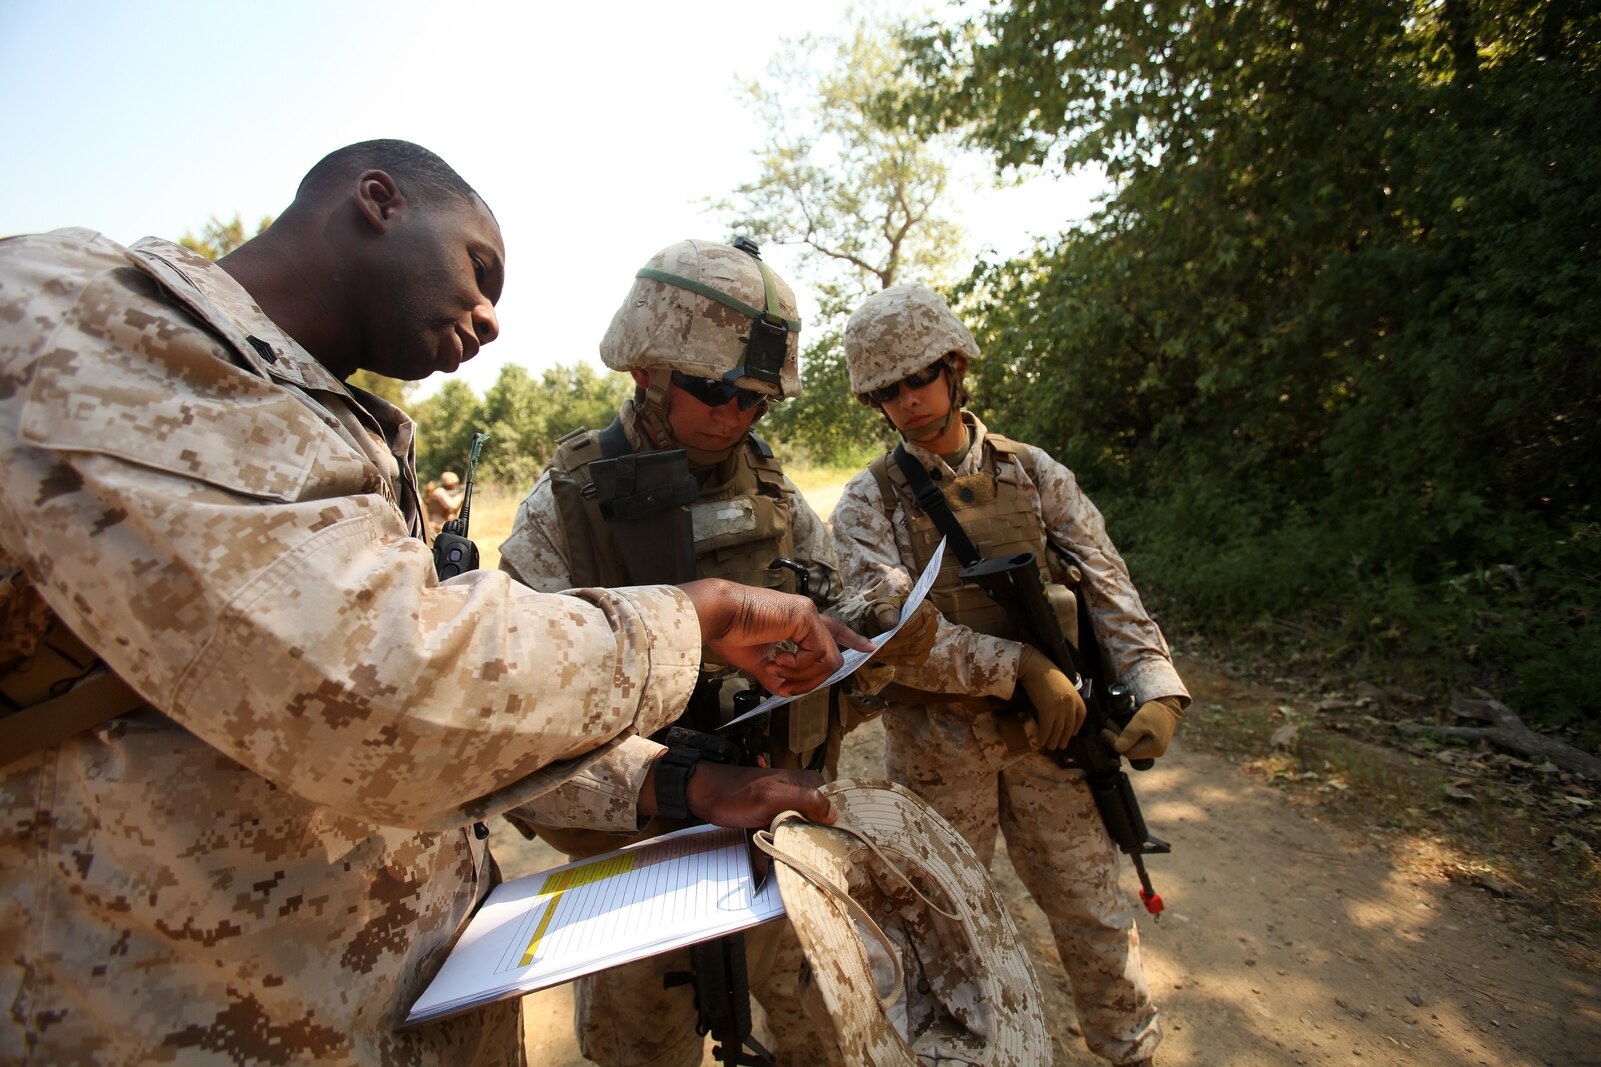 Marines with 1st Maintenance Battalion, 1st Marine Logistics Group, review a map to locate their checkpoint on a patrol during the Basic Combat Skills Course aboard Camp Pendleton, Calif., April 18, 2013. Approximately 40 Marines participated in the course designed to refresh Marines in the basics of Marine Corps combat skills to keep them ready for battle.